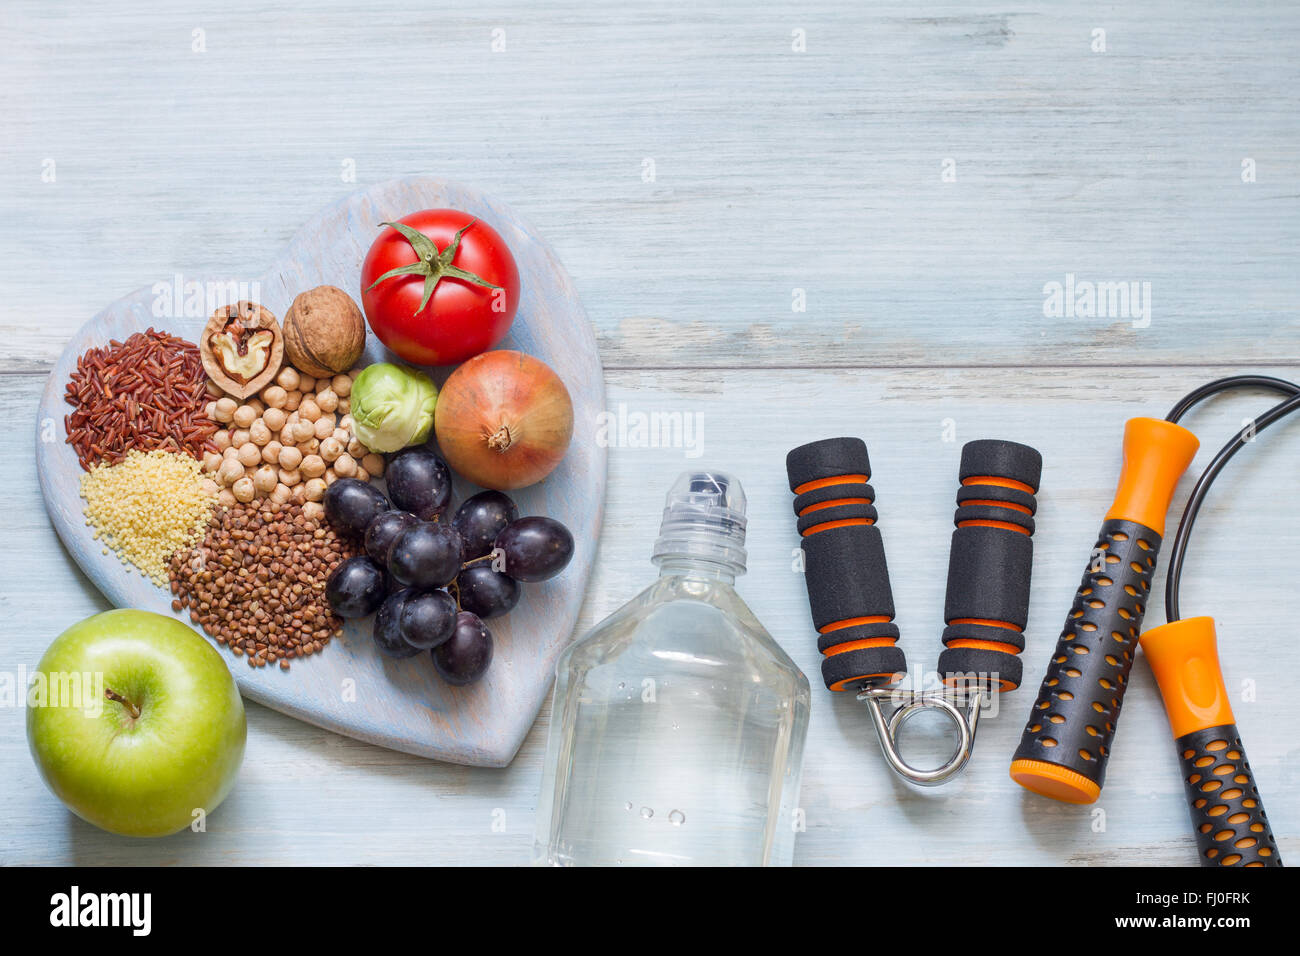 Healthy lifestyle concept with diet and fitness symbols Stock Photo